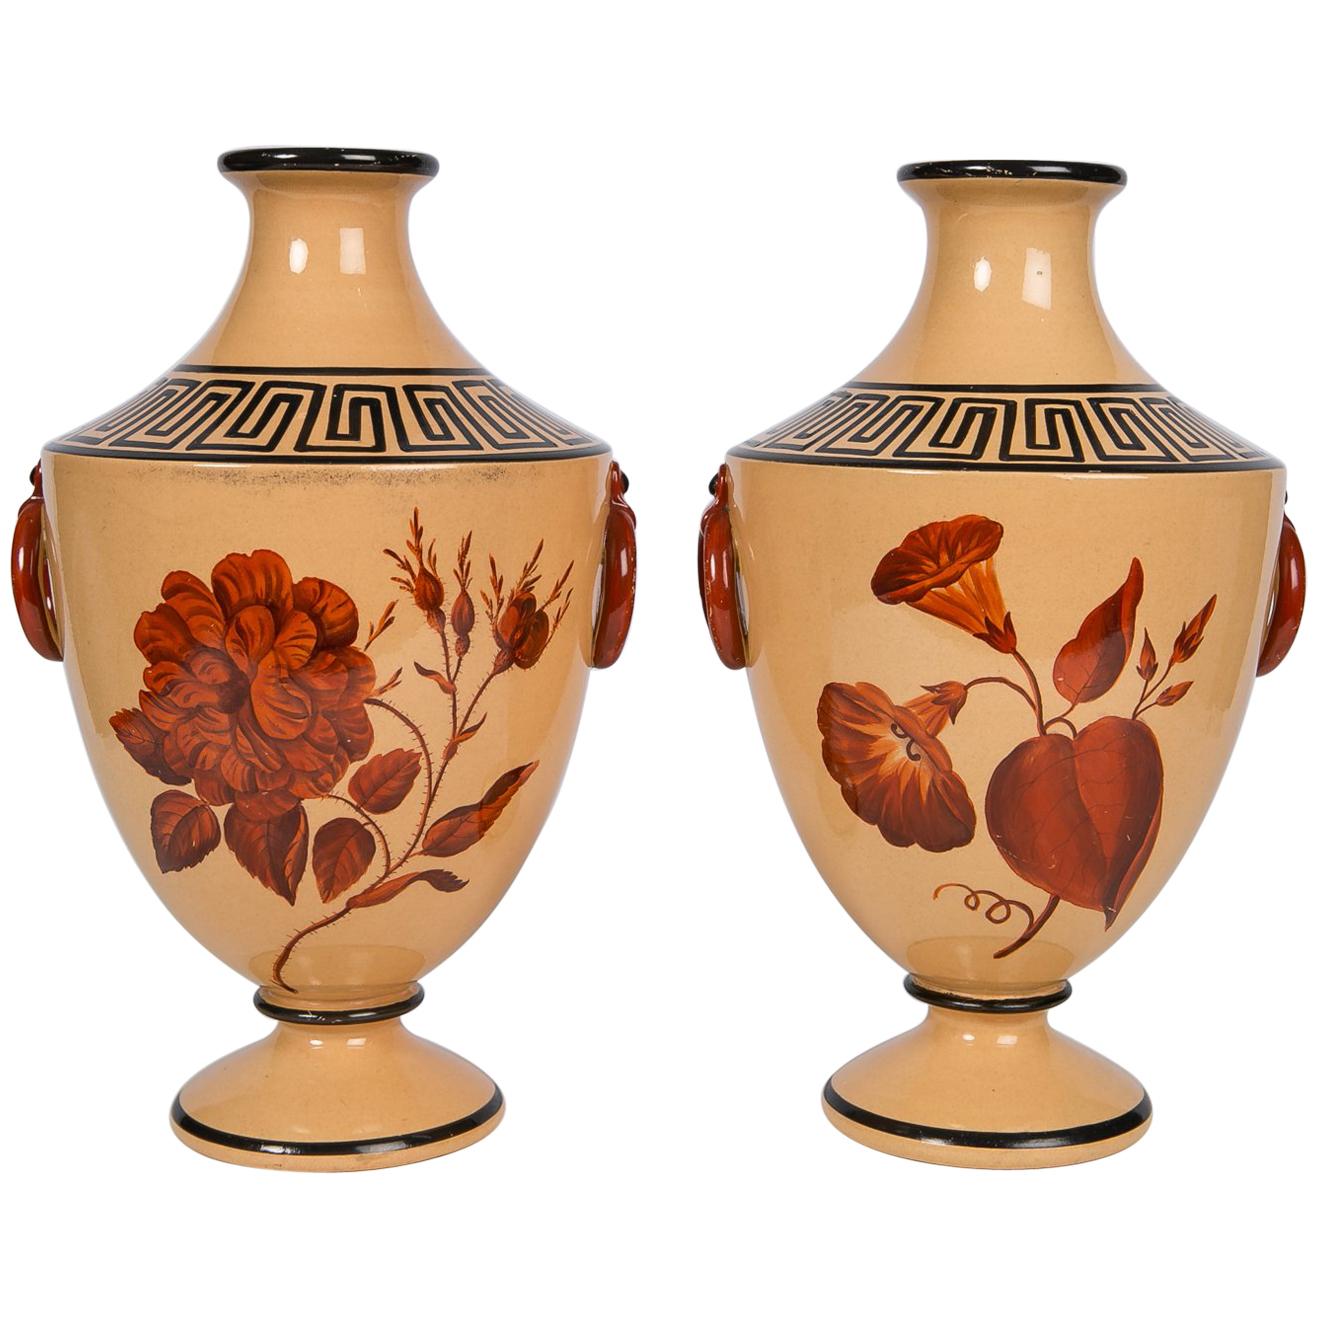 Vases with Large Red Flowers and Greek Key Decoration